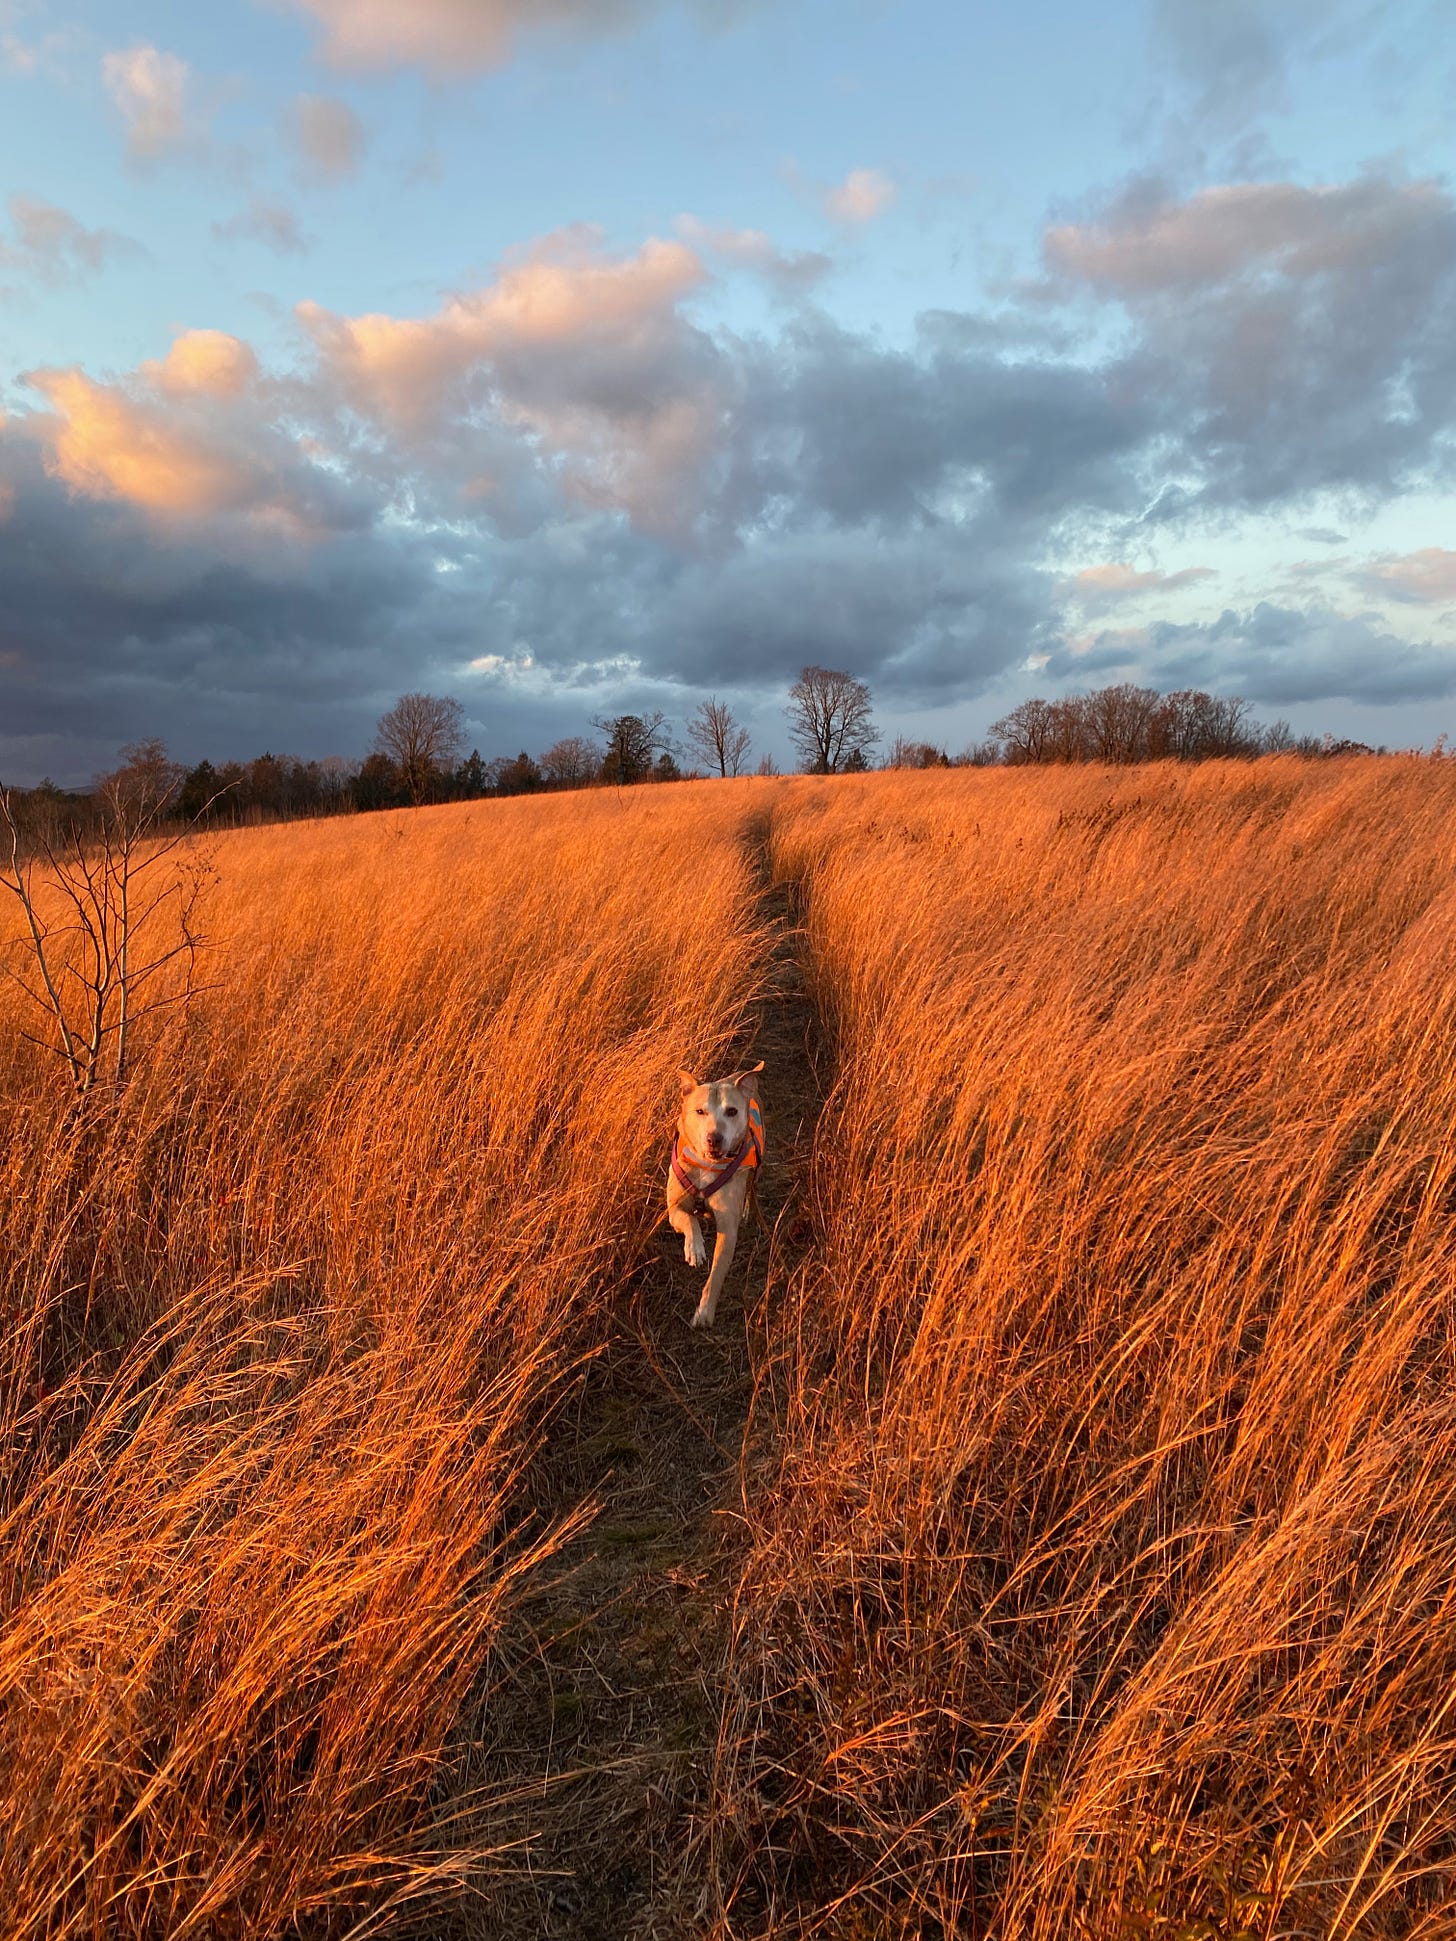 My pup bounding along a narrow path on top of a ridge at sunset. The grass around her is tall, waving, and deep golden, illuminated by the sun. The clouds are pink and blue.